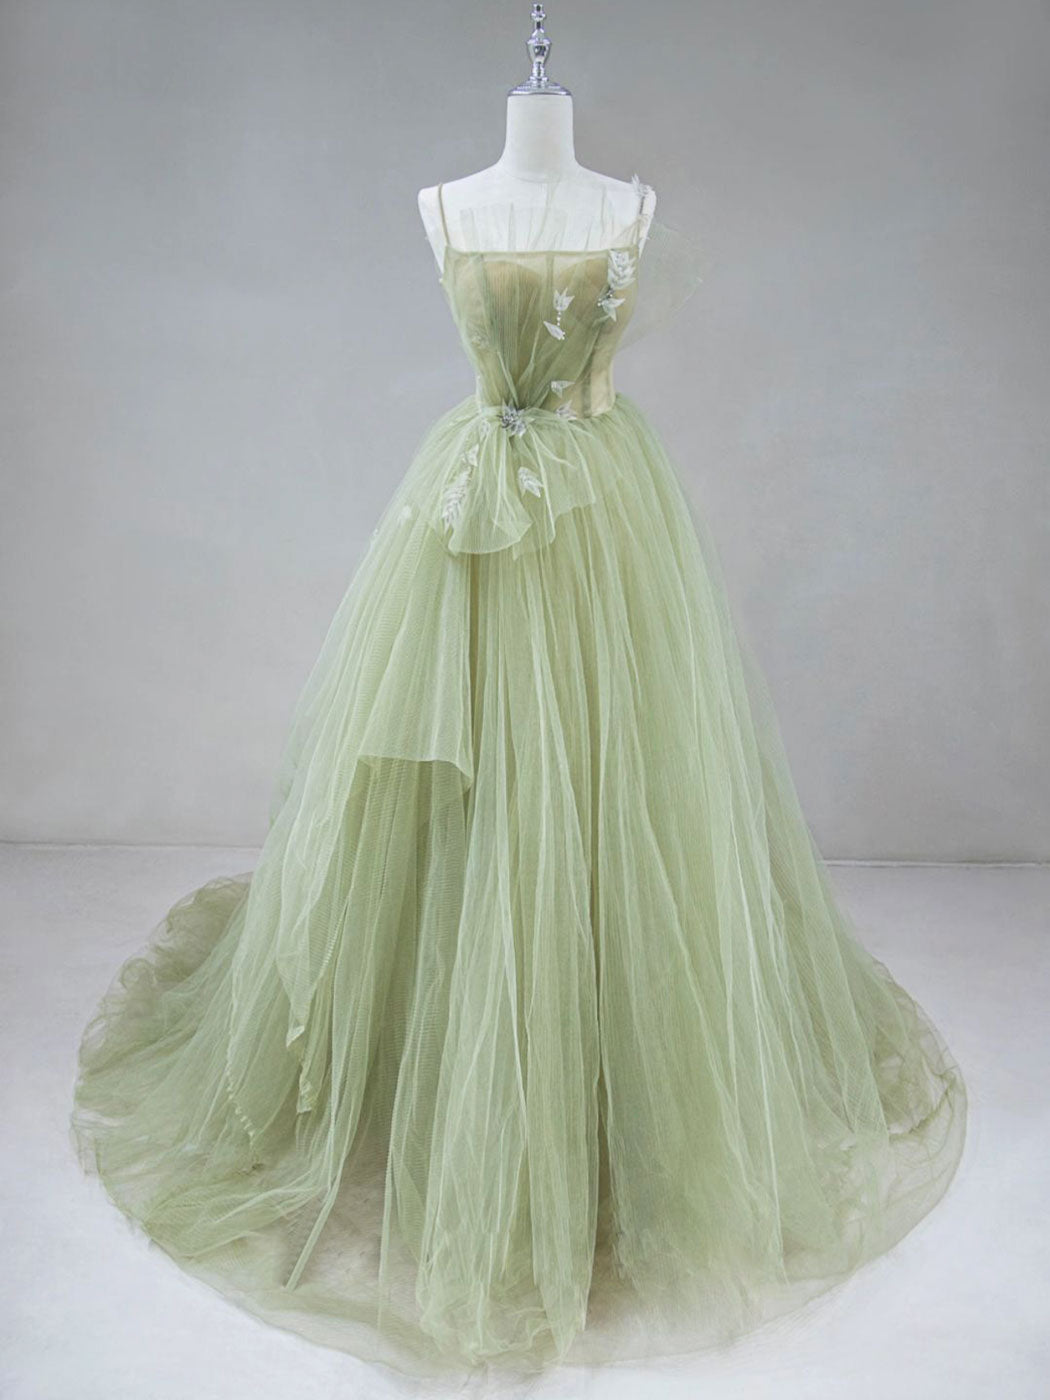 Green Tulle Long Corset Prom Dress, A-Line Green Corset Formal Long Evening Dress outfit, Prom Dress Bodycon